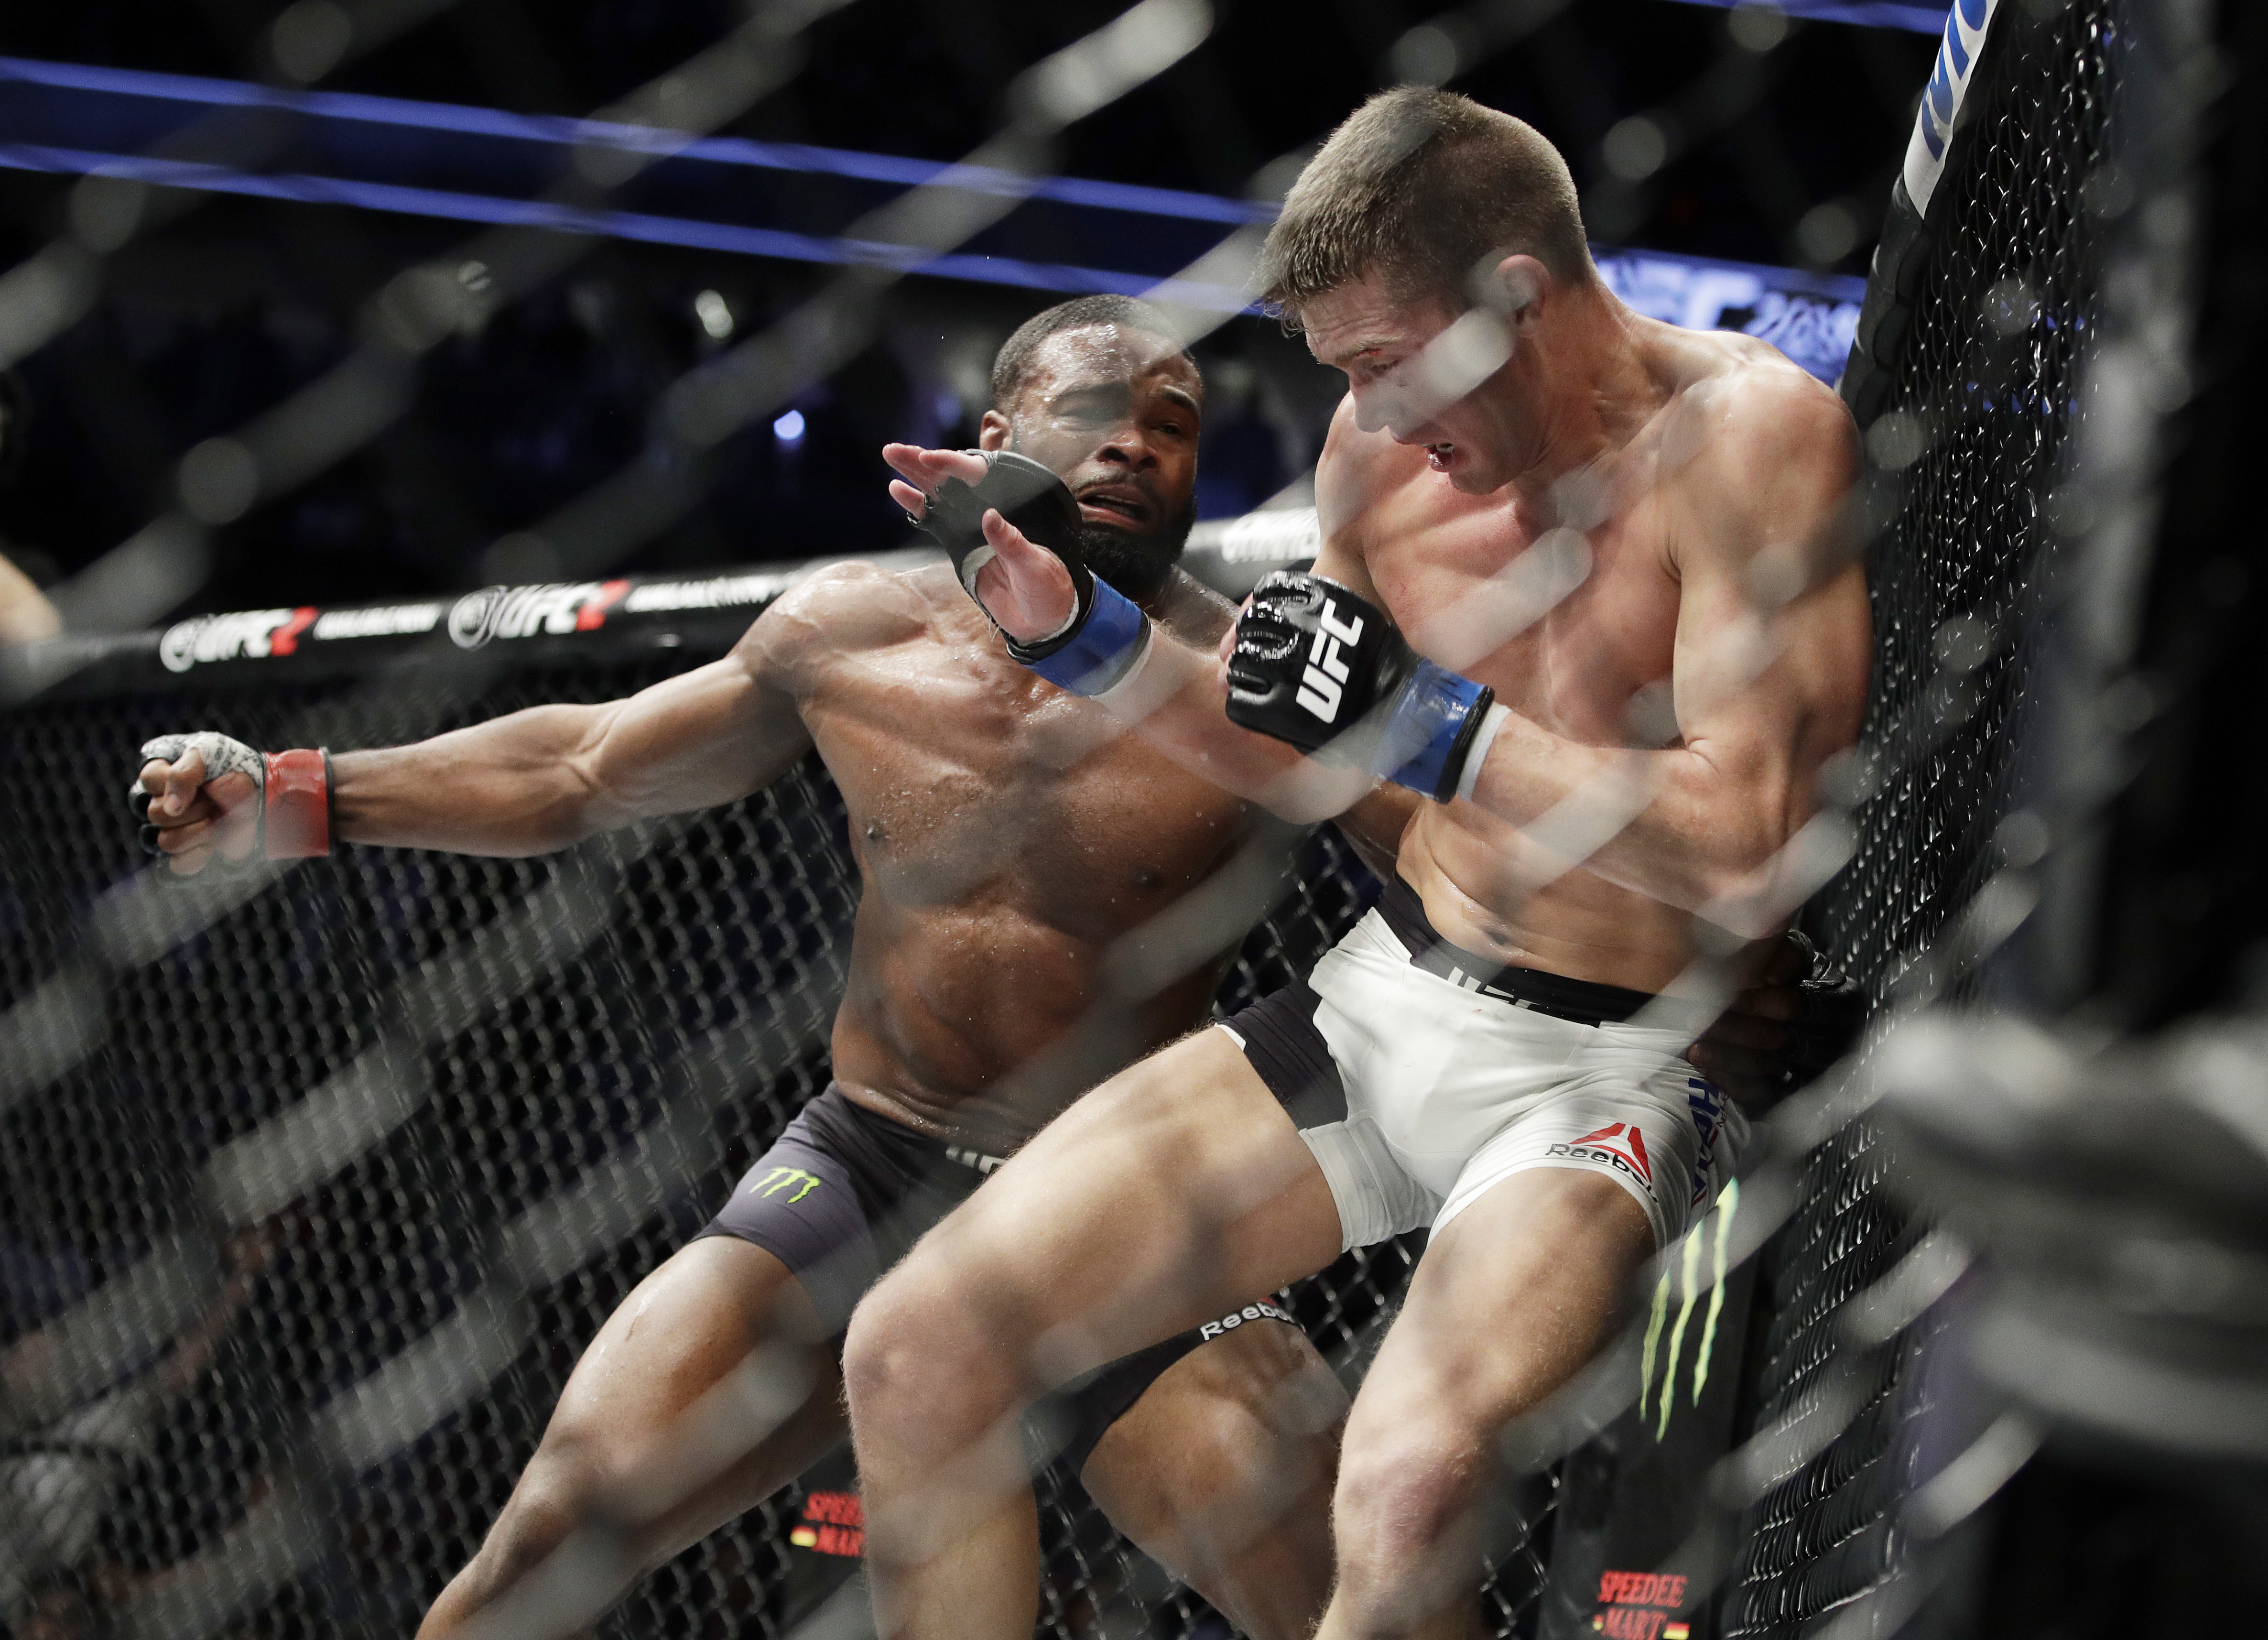 Tyron Woodley, left, takes a swing at Stephen Thompson in a welterweight championship mixed martial arts bout at UFC 209, Saturday, March 4, 2017, in Las Vegas. (AP Photo/John Locher)